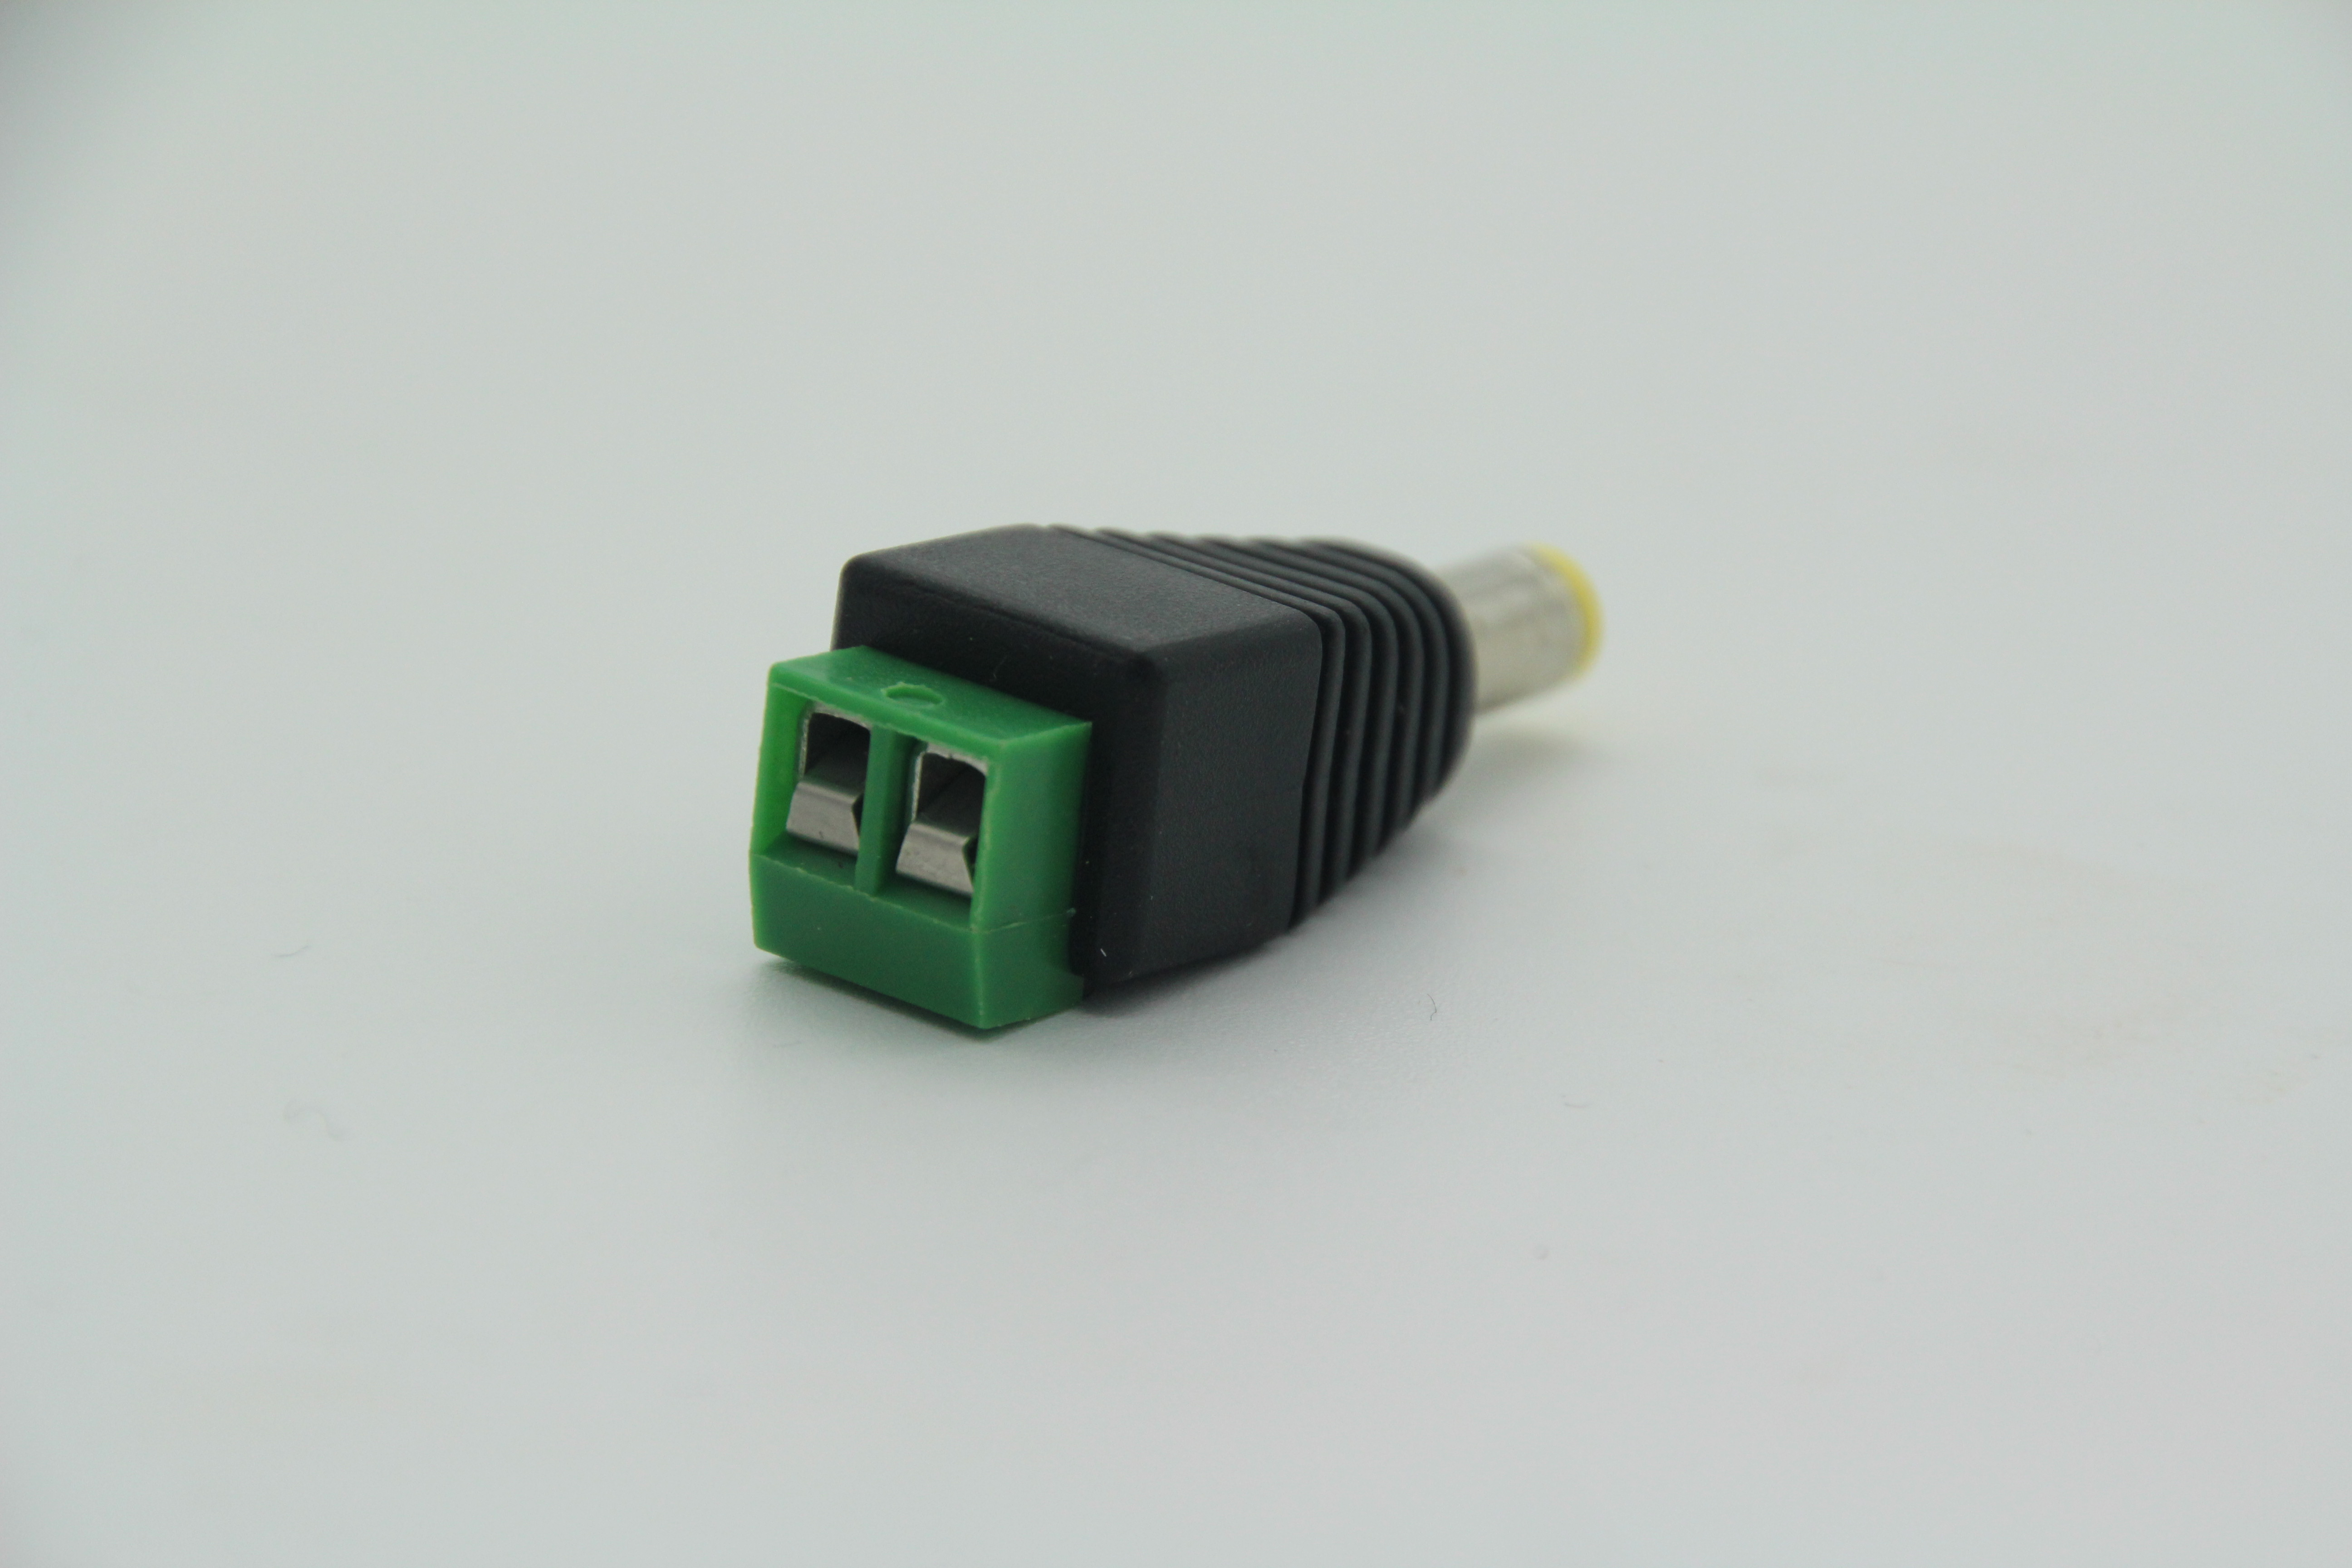 DC YELLOW GLUE ADAPTER MALE MONITORING SOLDERLESS CONNECTOR DC REVOLUTION GREEN TERMINAL DC POWER CONNECTOR